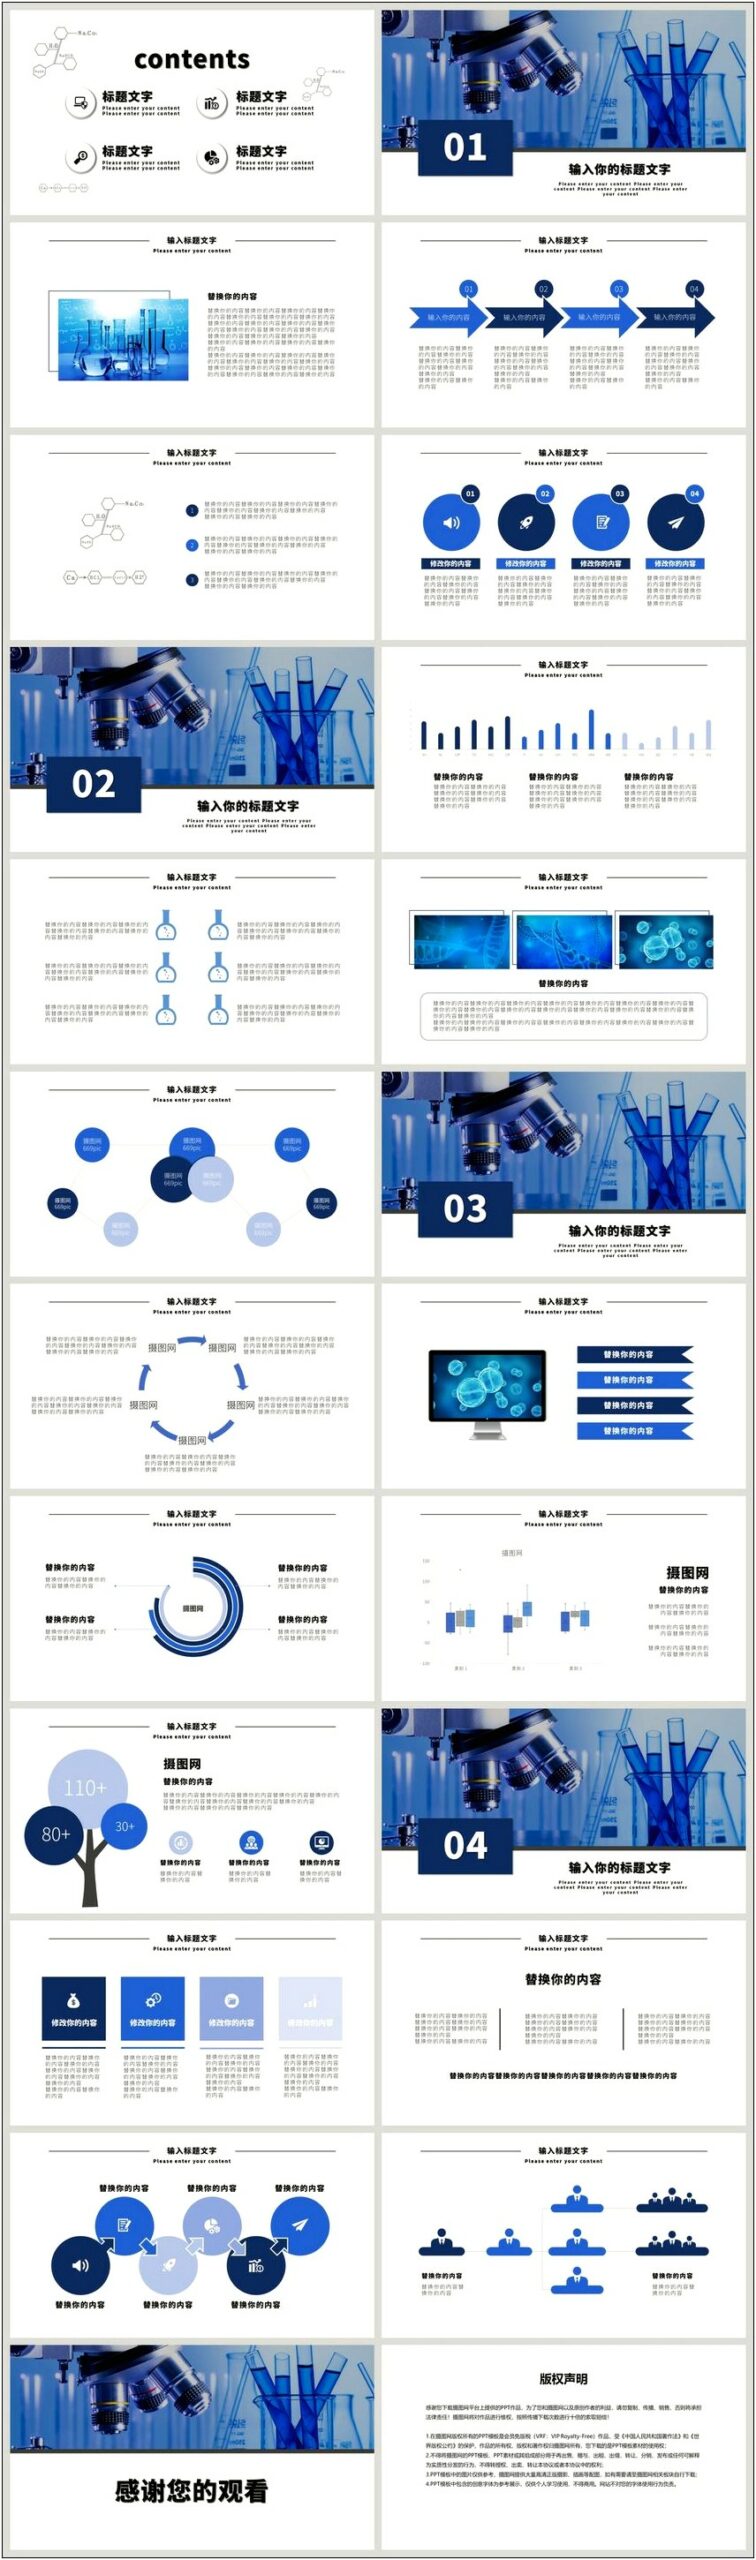 Chemistry Powerpoint Templates Free Download 2018